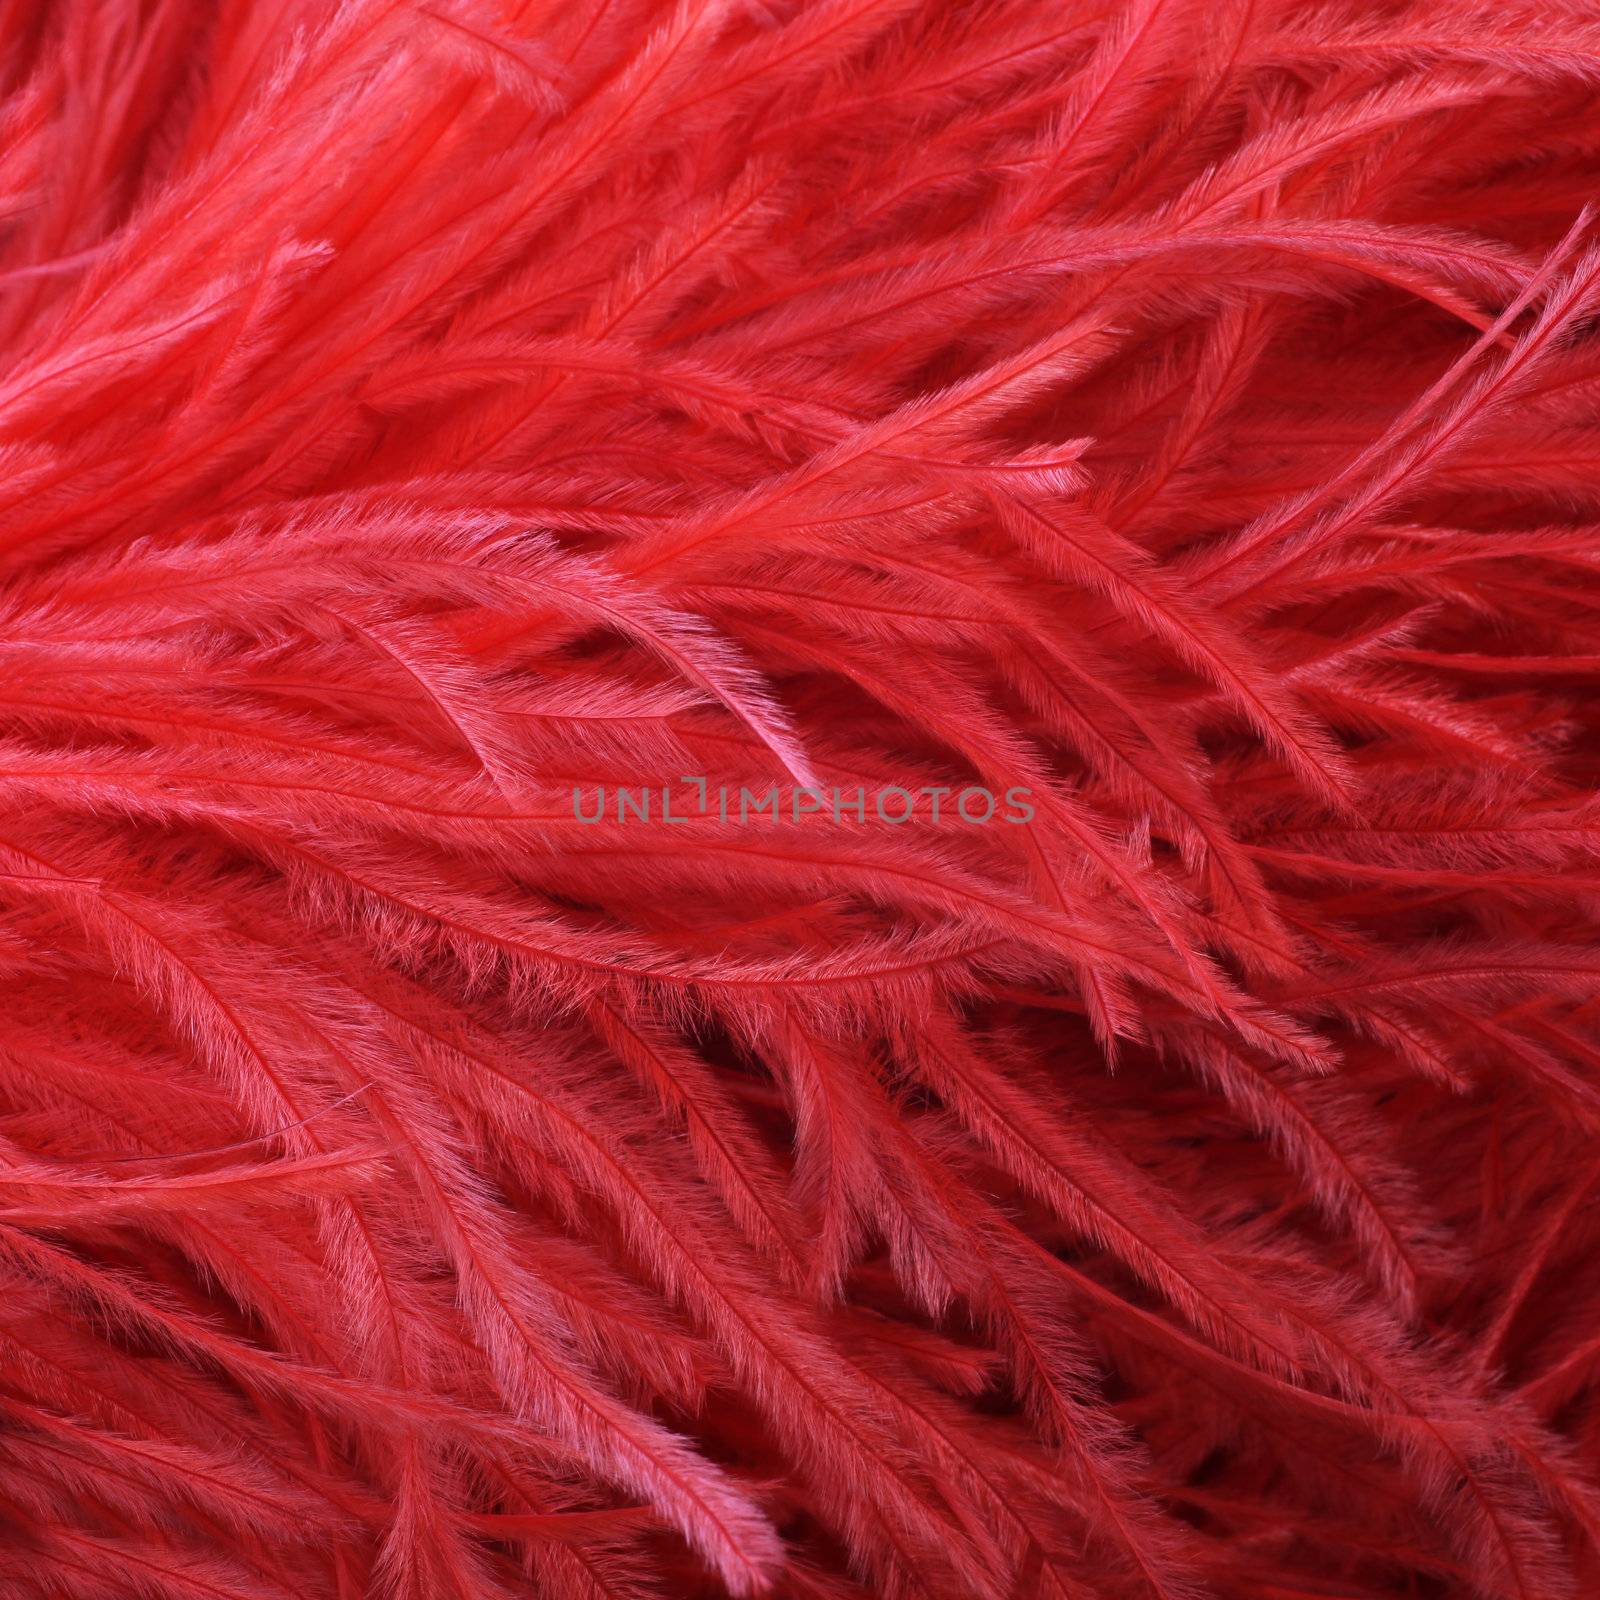 Closeup detail of an soft fluffy red ostrich feather boa or stole worn as an elegant fashion accessory